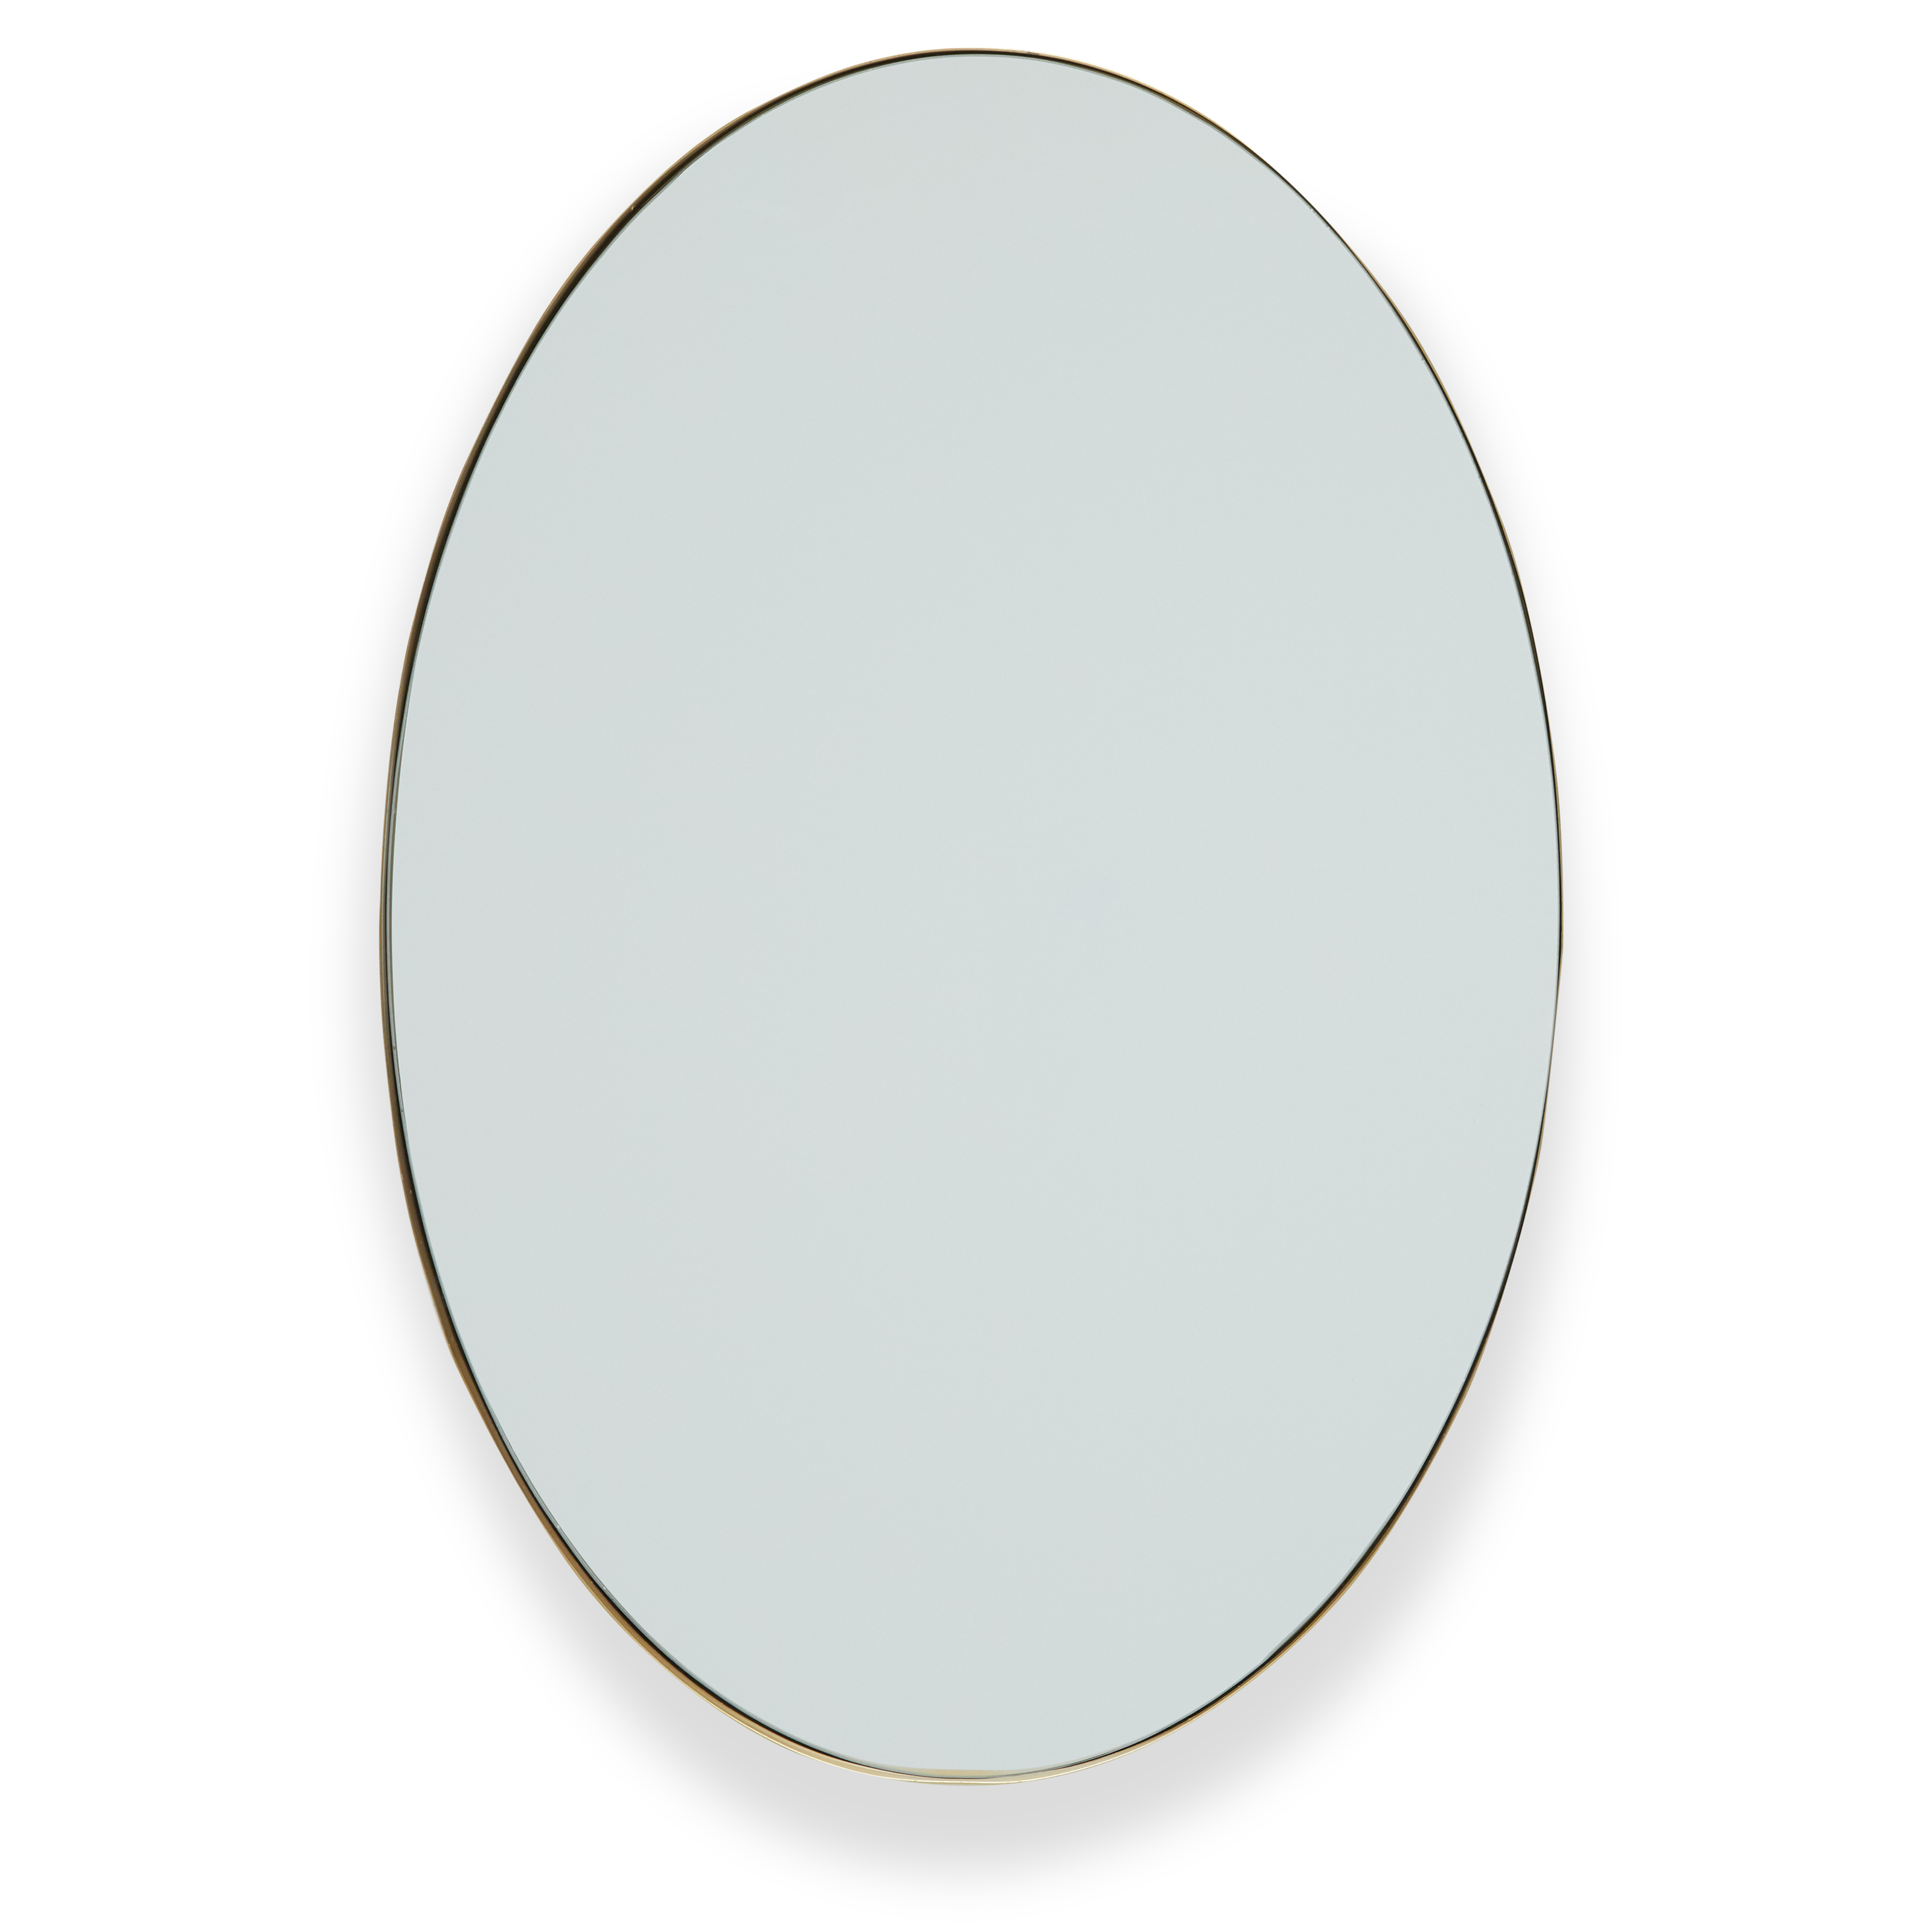 Oval Metal Wall Mirror by Drew Barrymore Flower Home - image 5 of 6